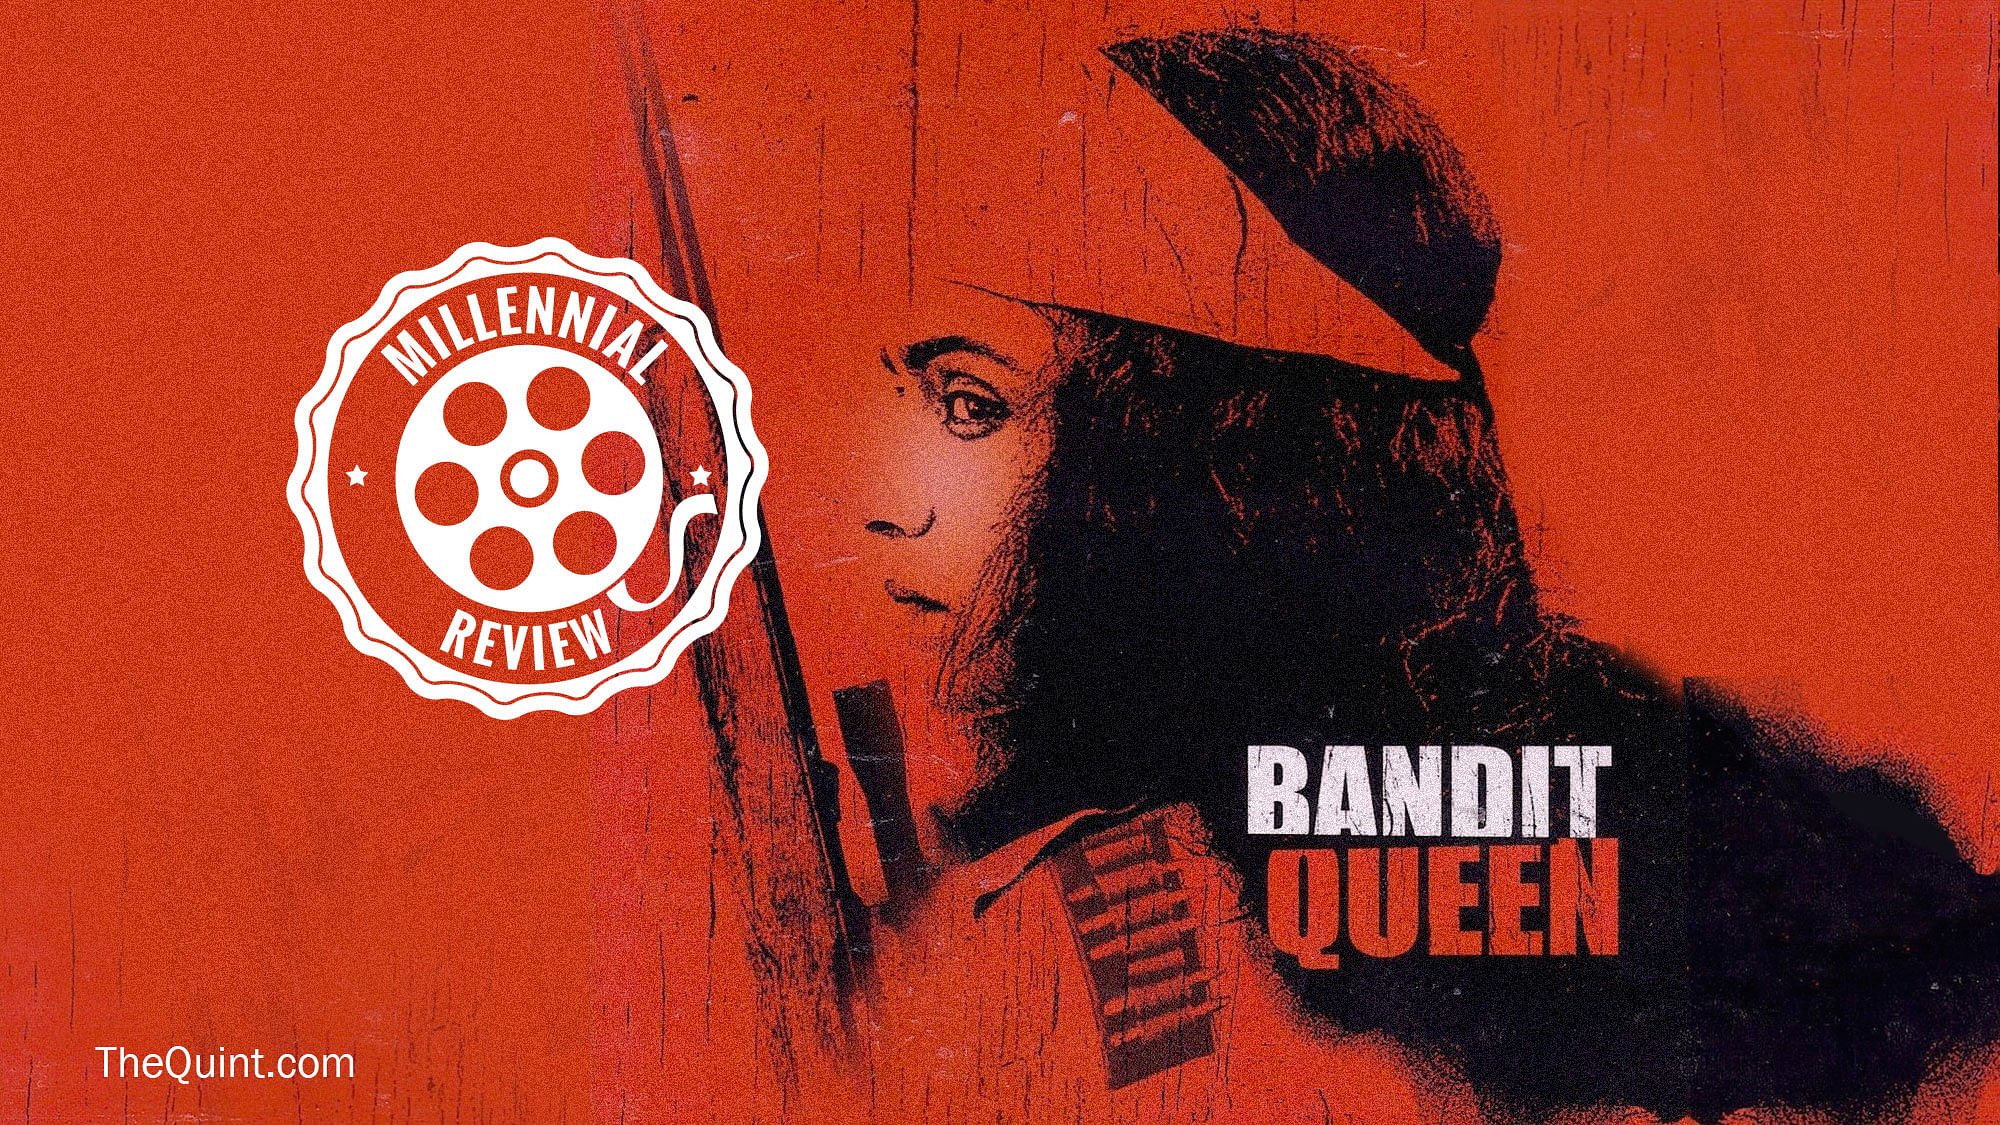 

You lose track of how many times Phoolan Devi has been raped in <i>Bandit Queen</i> – it’s an excruciating watch.